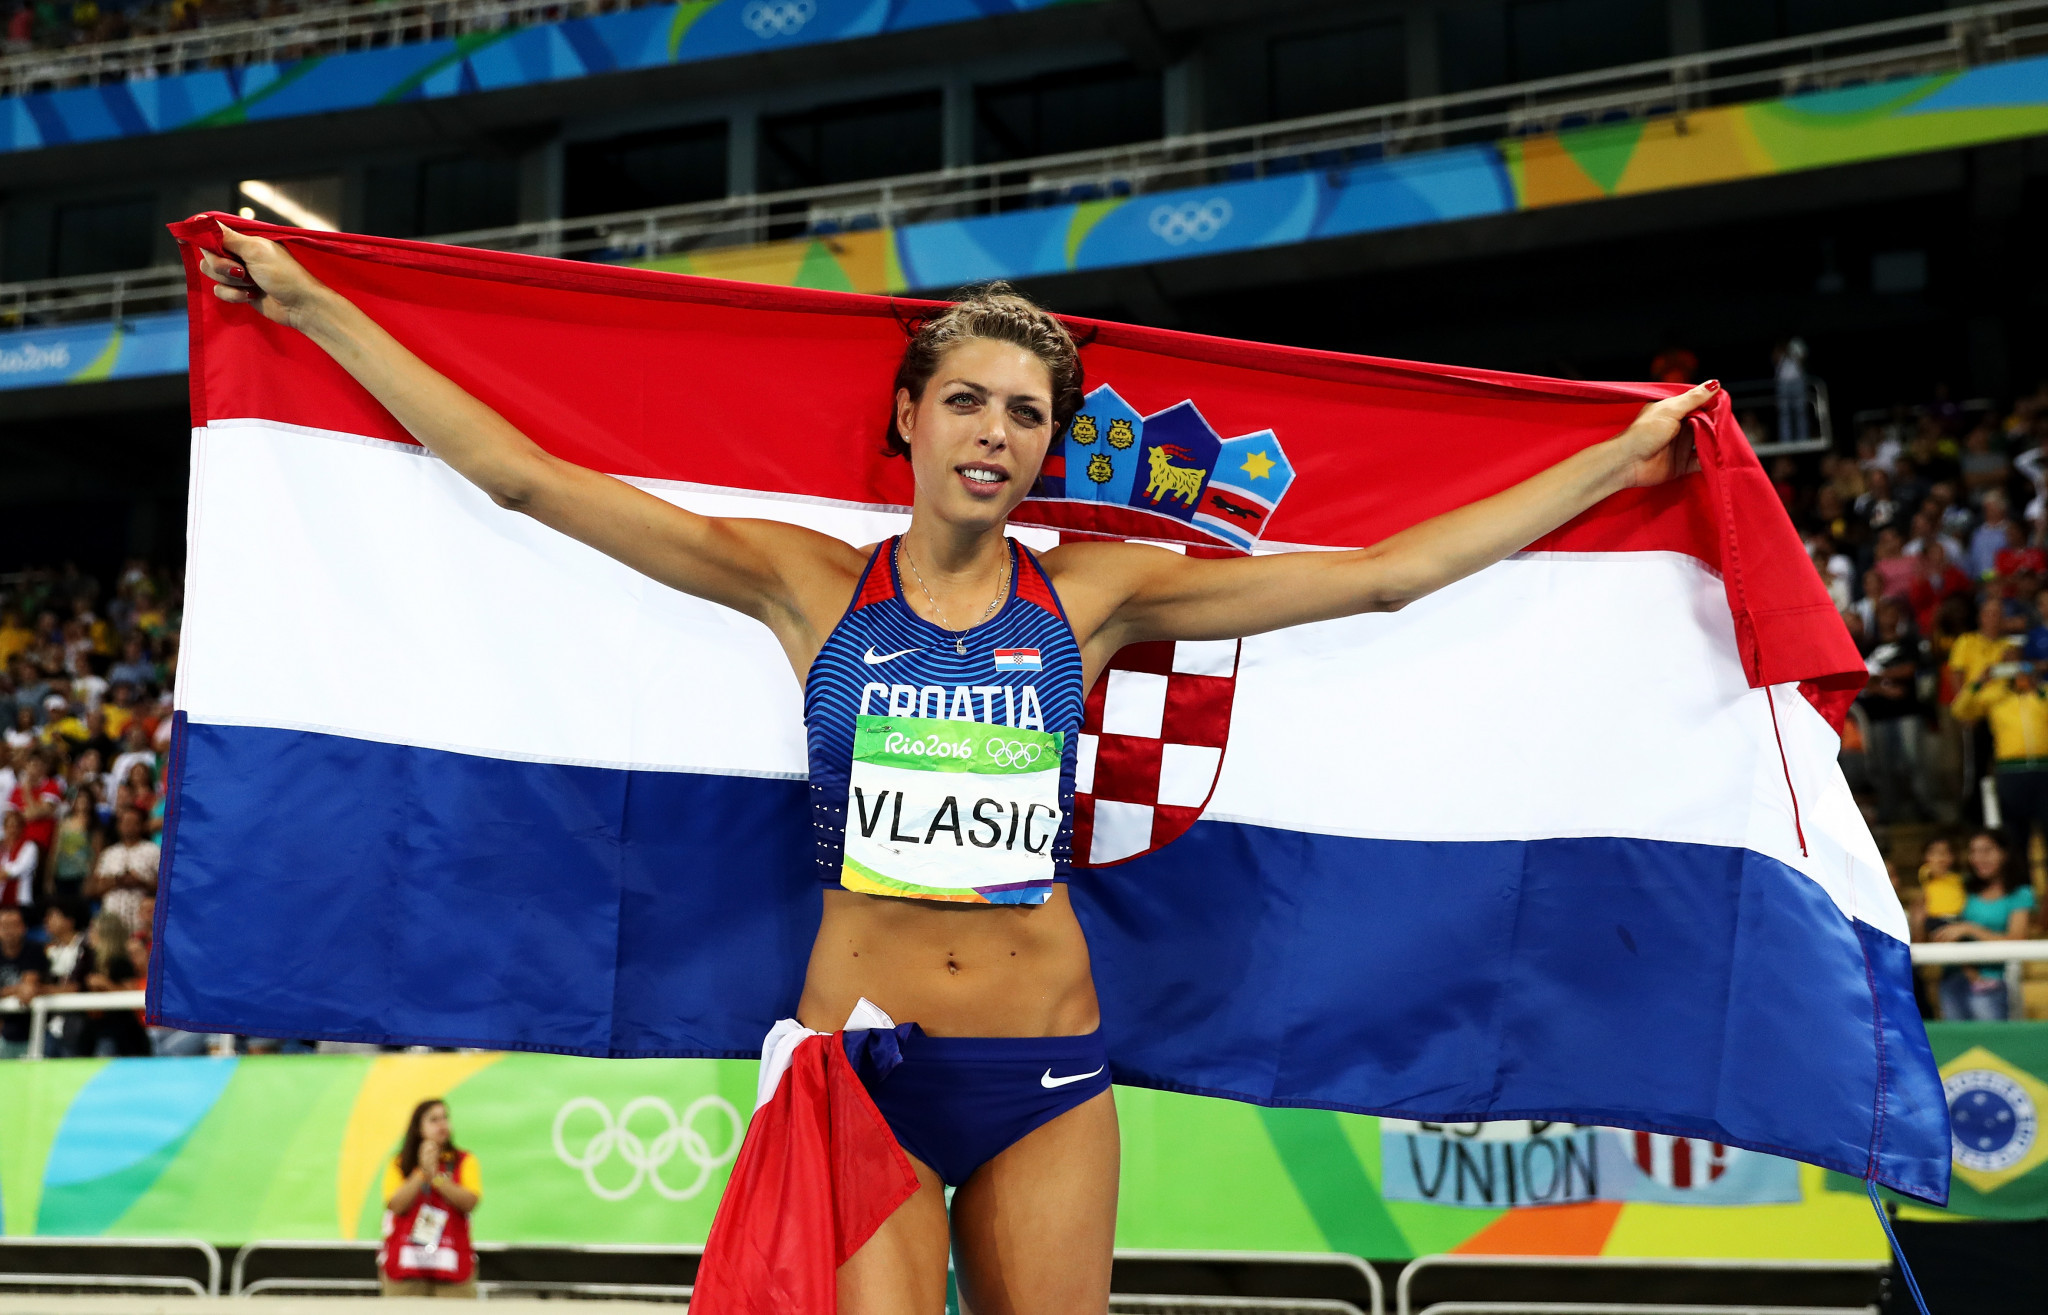 Blanka Vlašić has called on athletes from across the world to donate to relief for Zagreb ©Getty Images